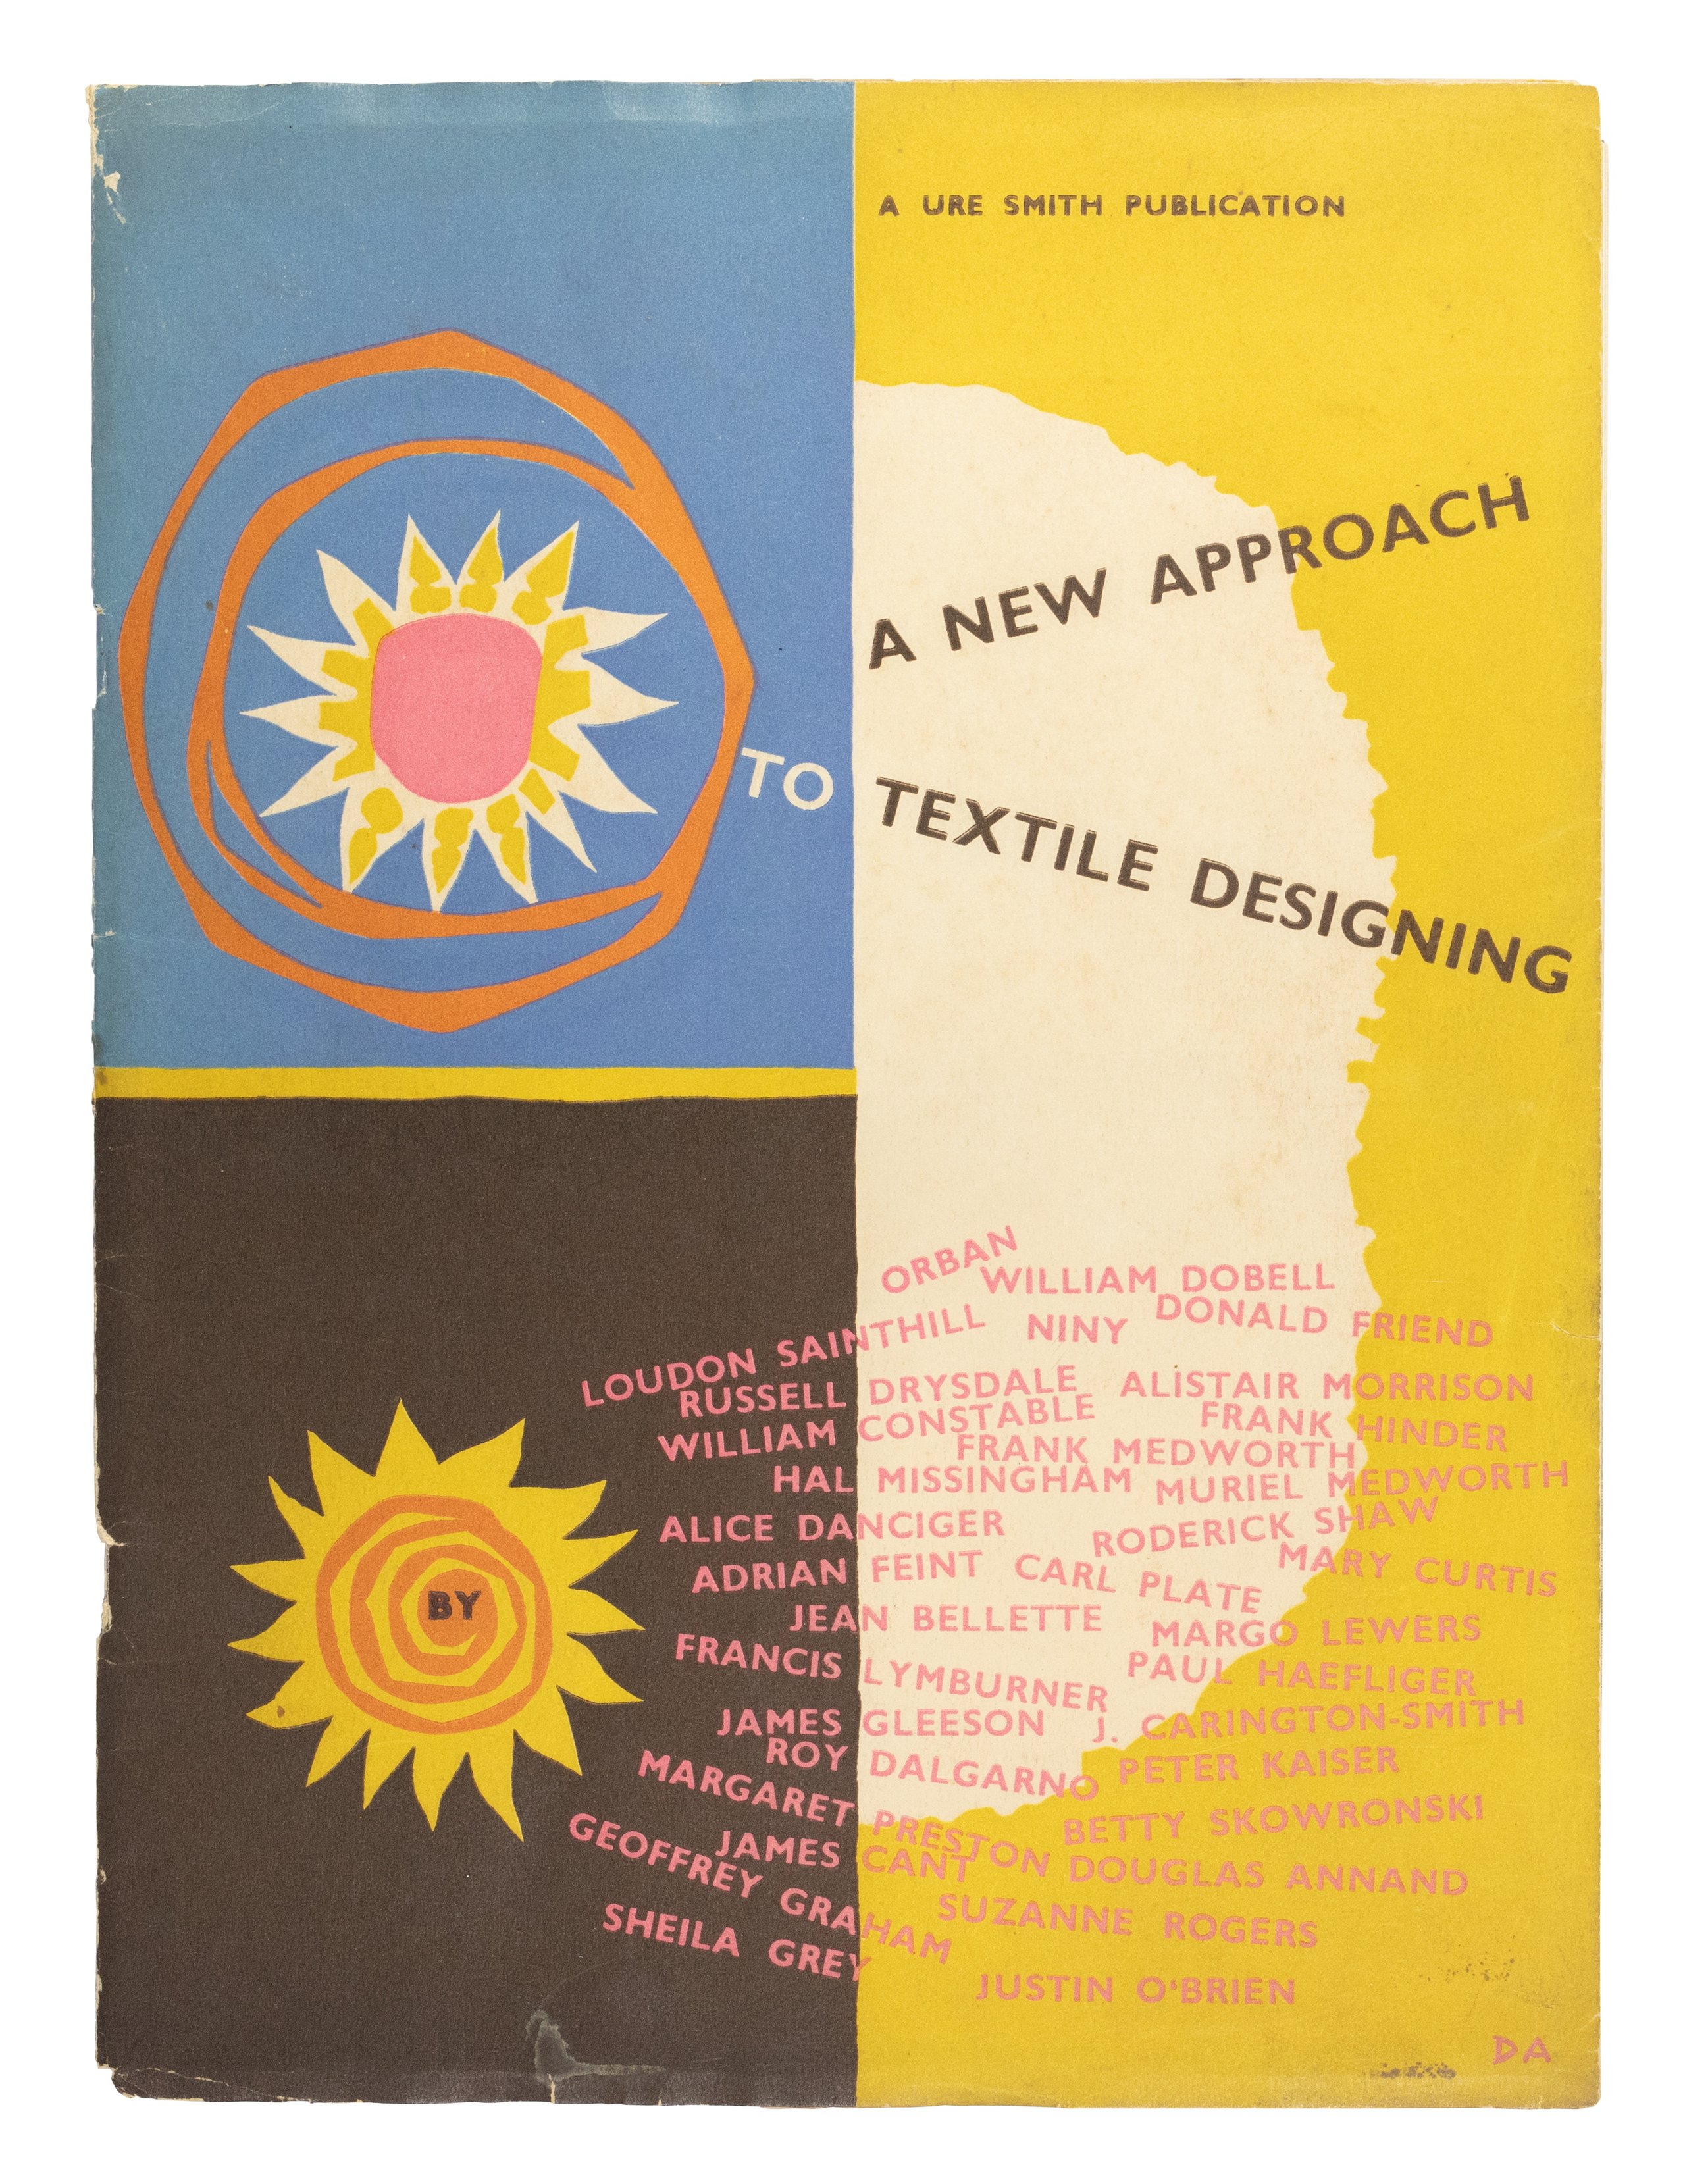 'A New Approach to Textile Designing' book published by Ure Smith Pty Ltd